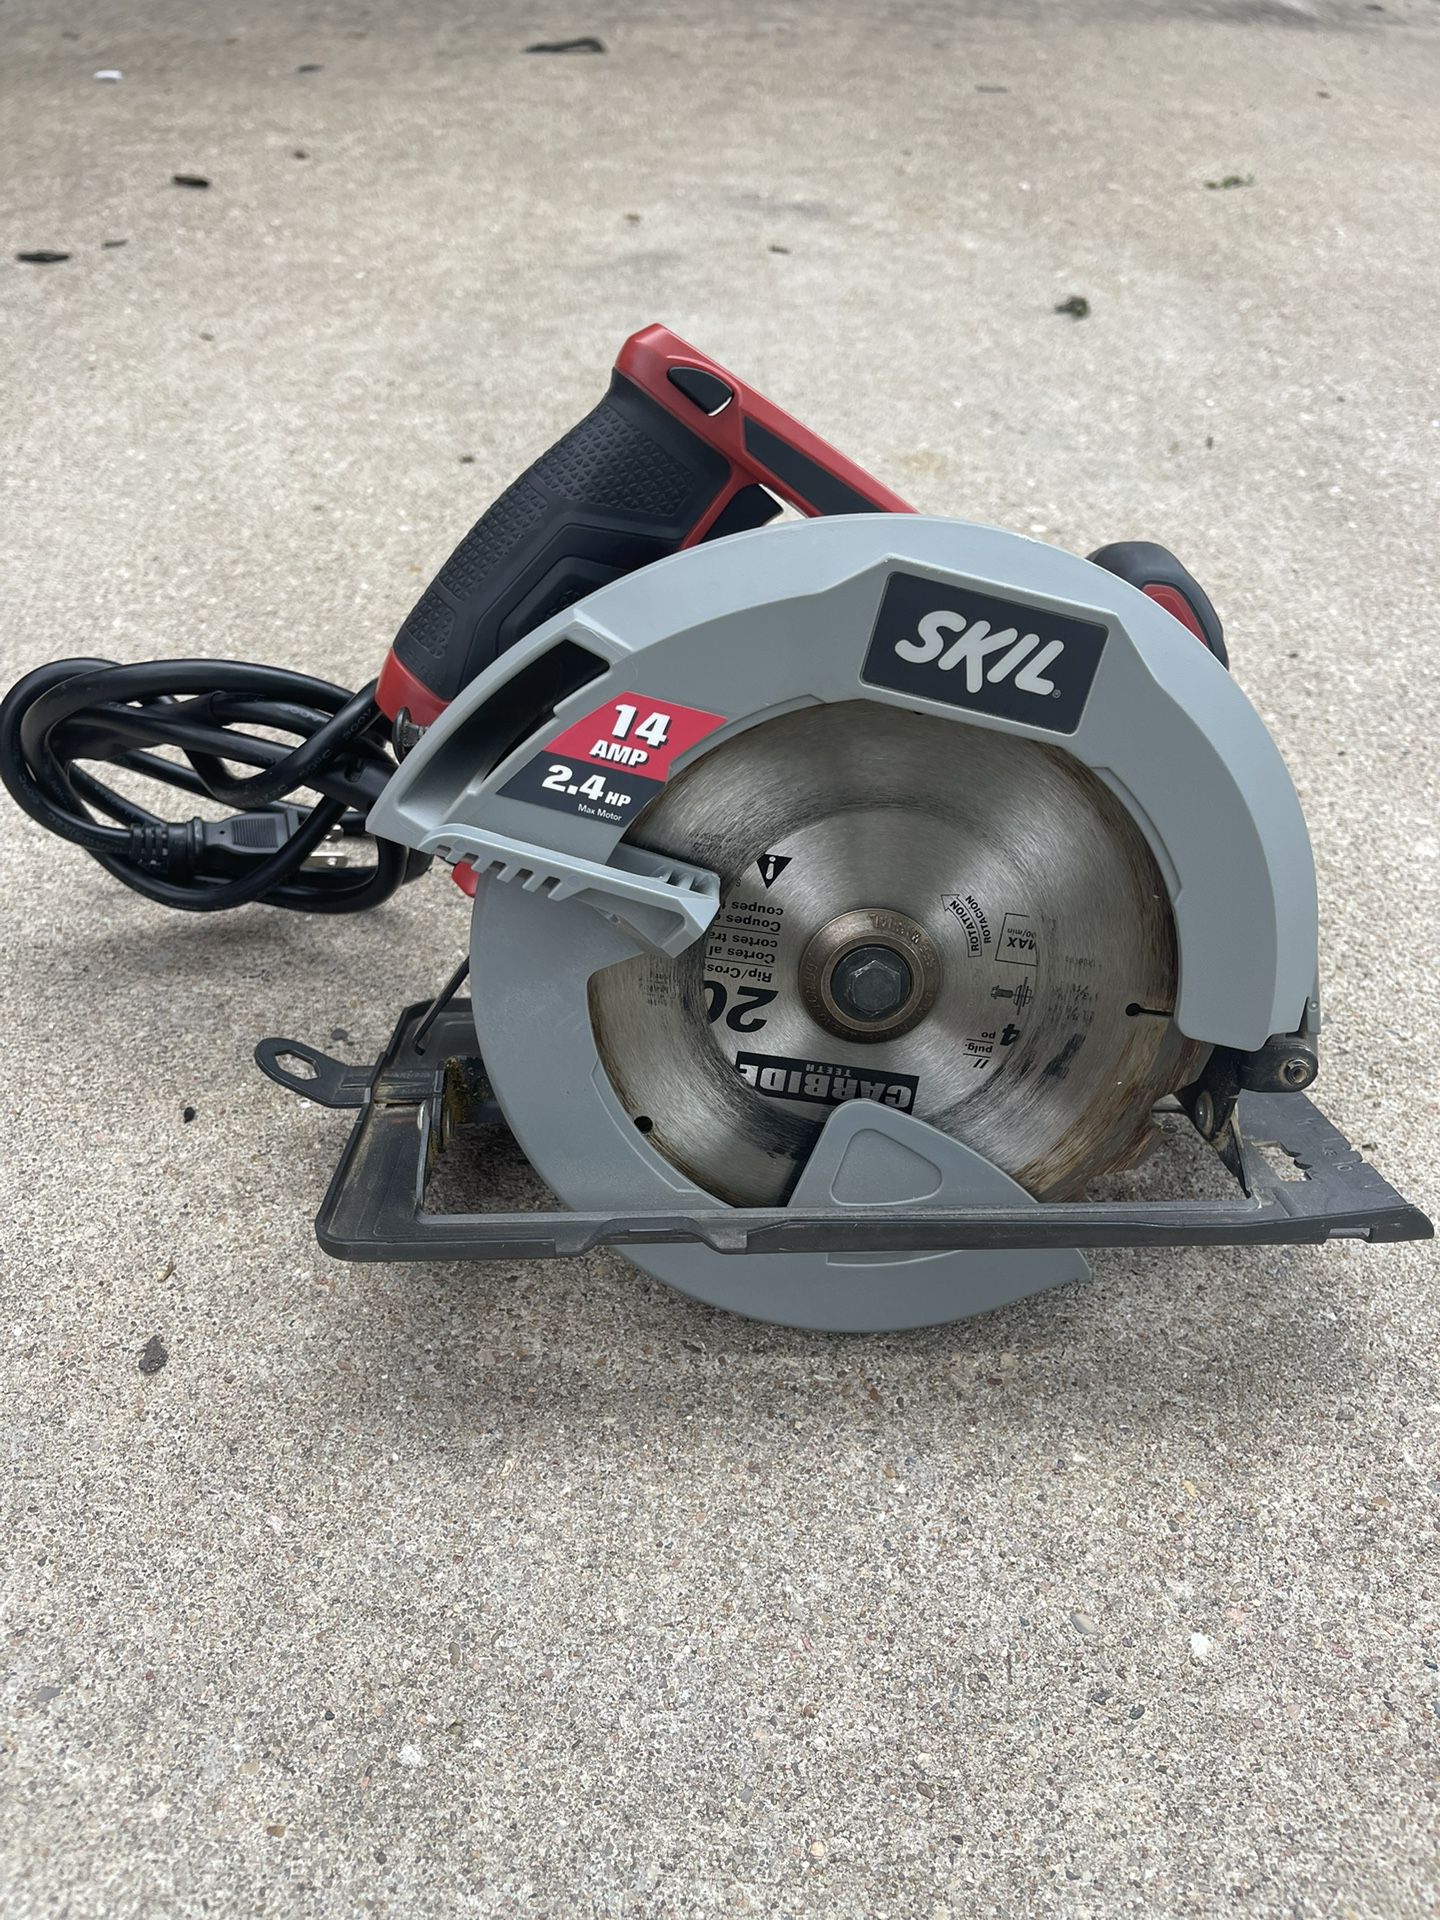 Wired Skil 5080-01 14-Amp 7-1/4" Circular Saw, Red